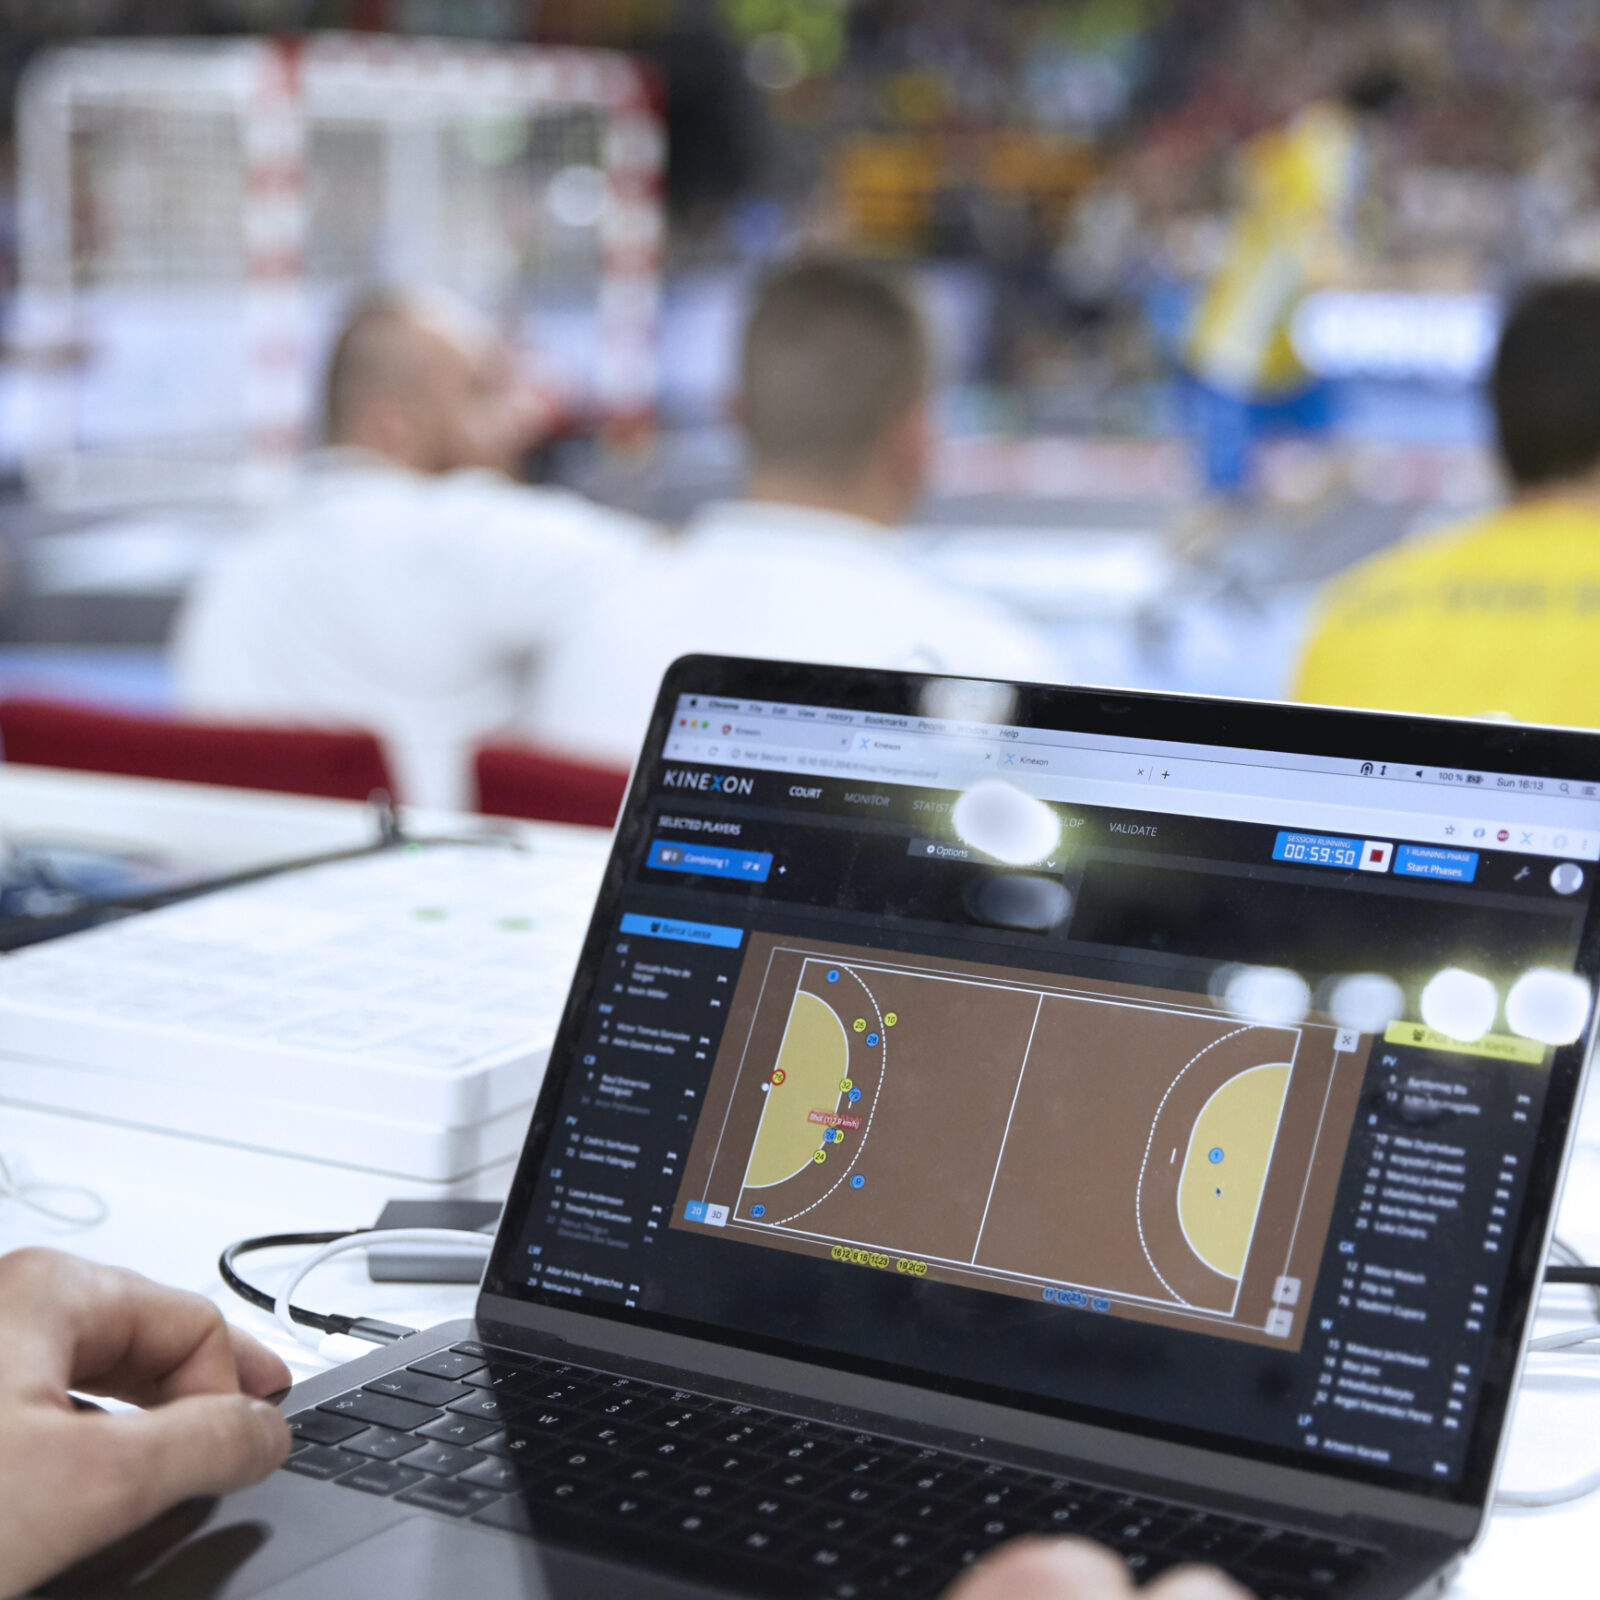 A sports analytics dashboard is reviewed by a sports scientist during a professional team handball game in Germany.